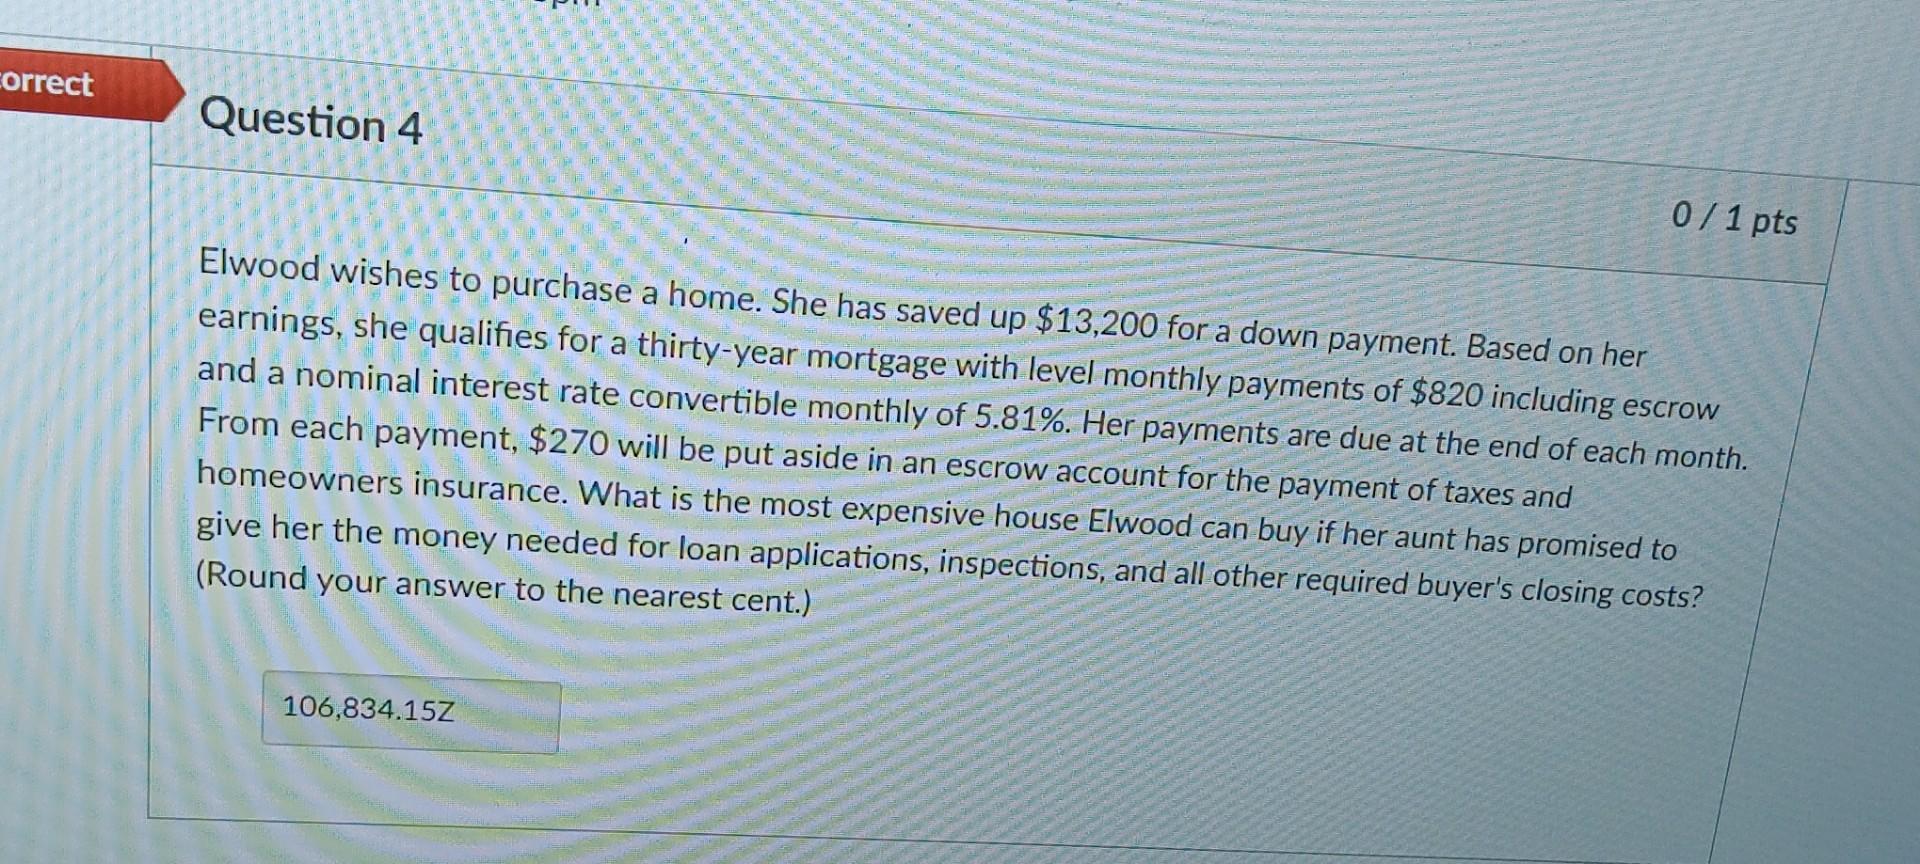 correct Question 4 0/1 pts Elwood wishes to purchase a home. She has saved up $13,200 for a down payment.